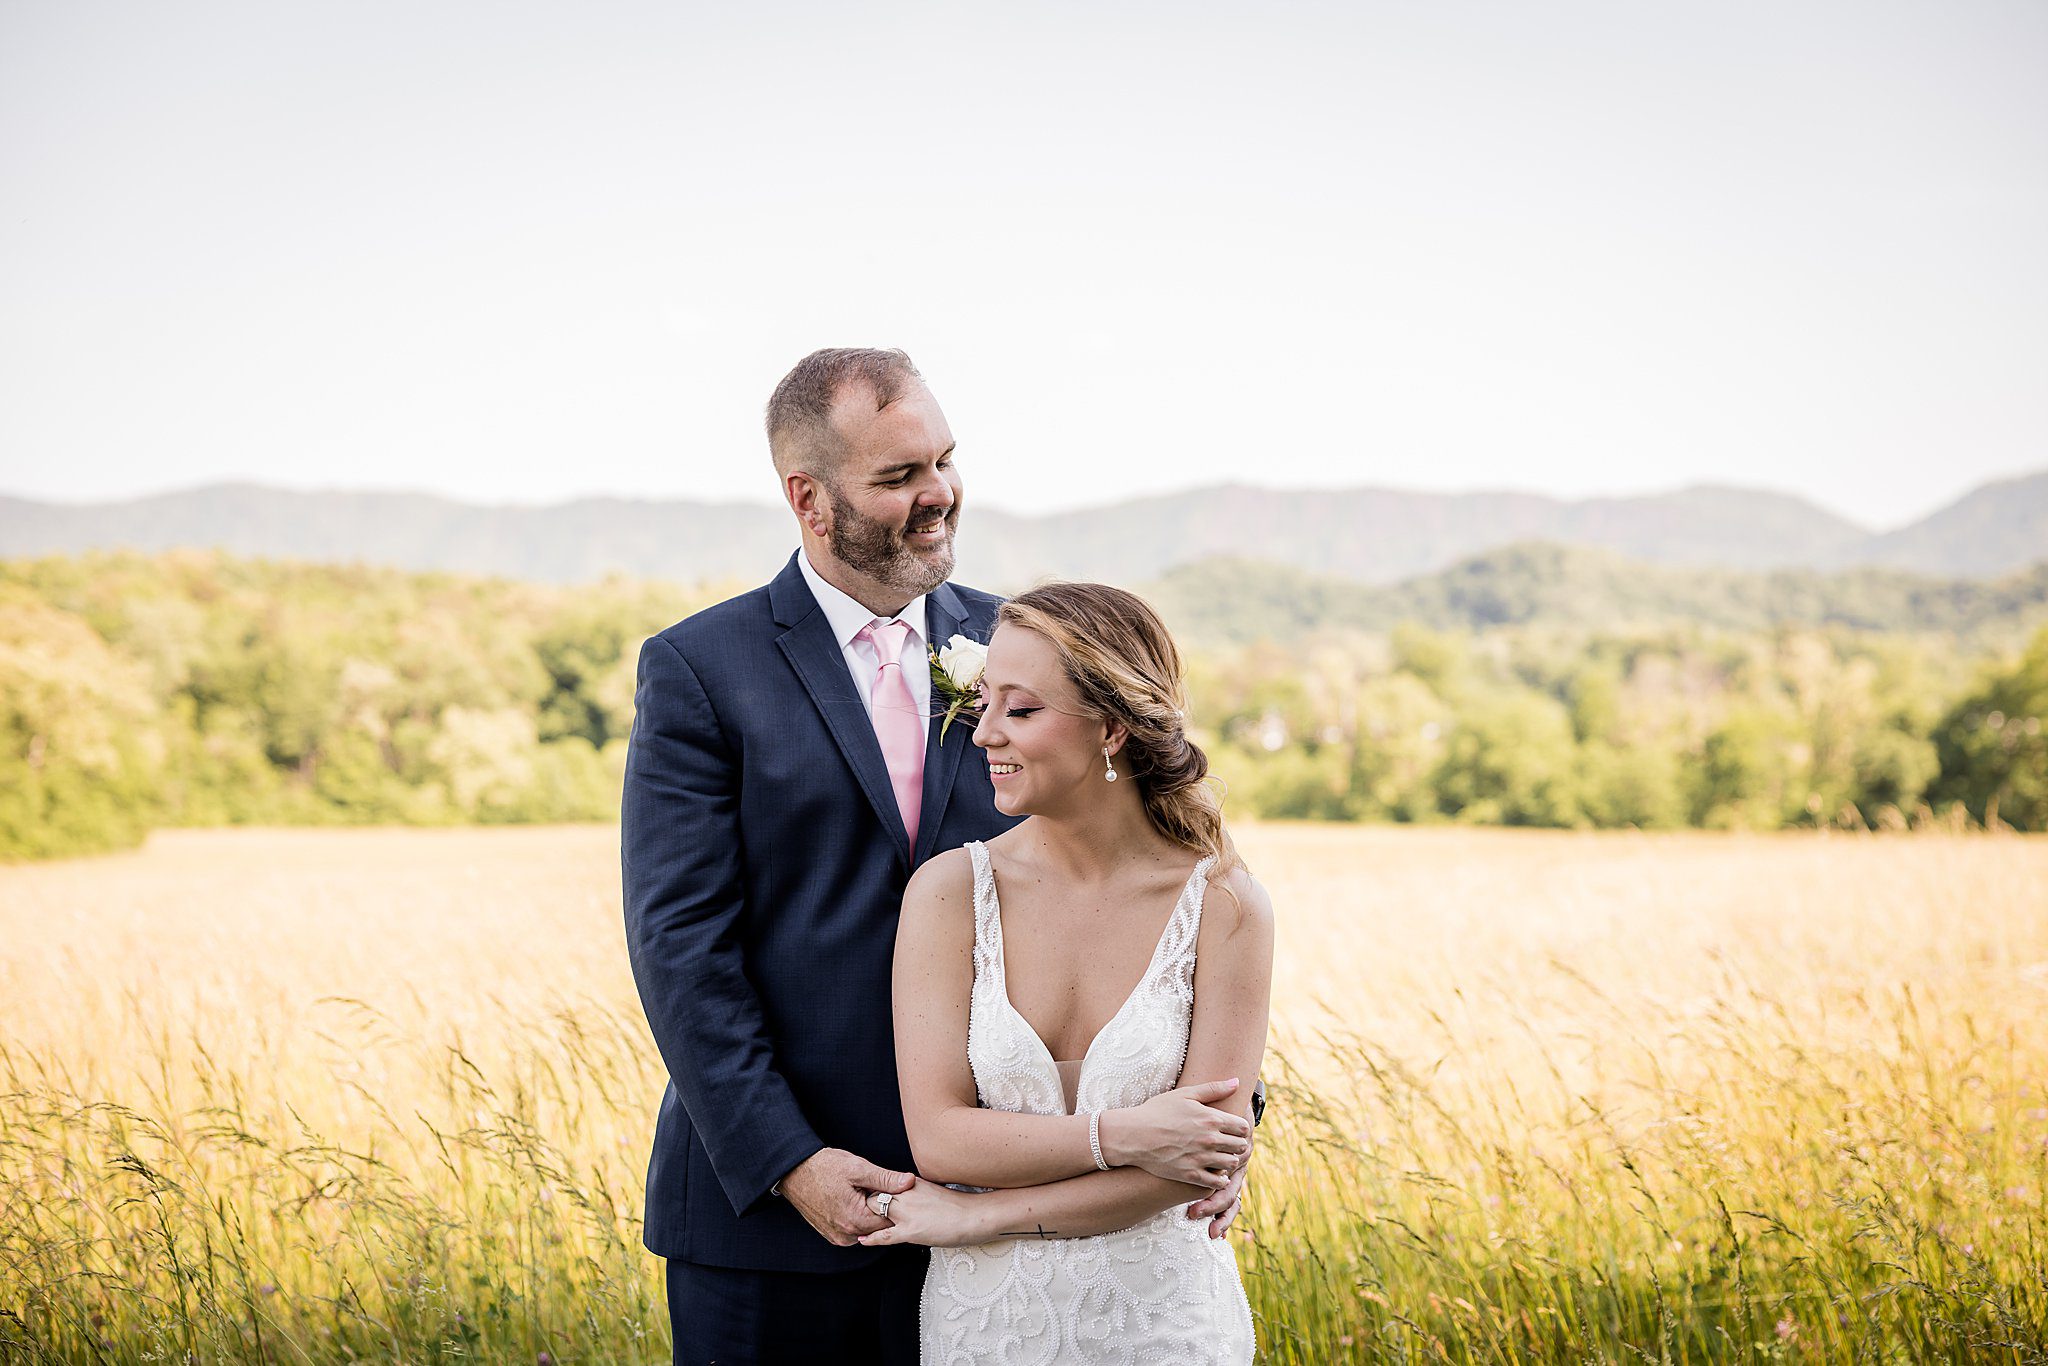 Simple Family Elopement